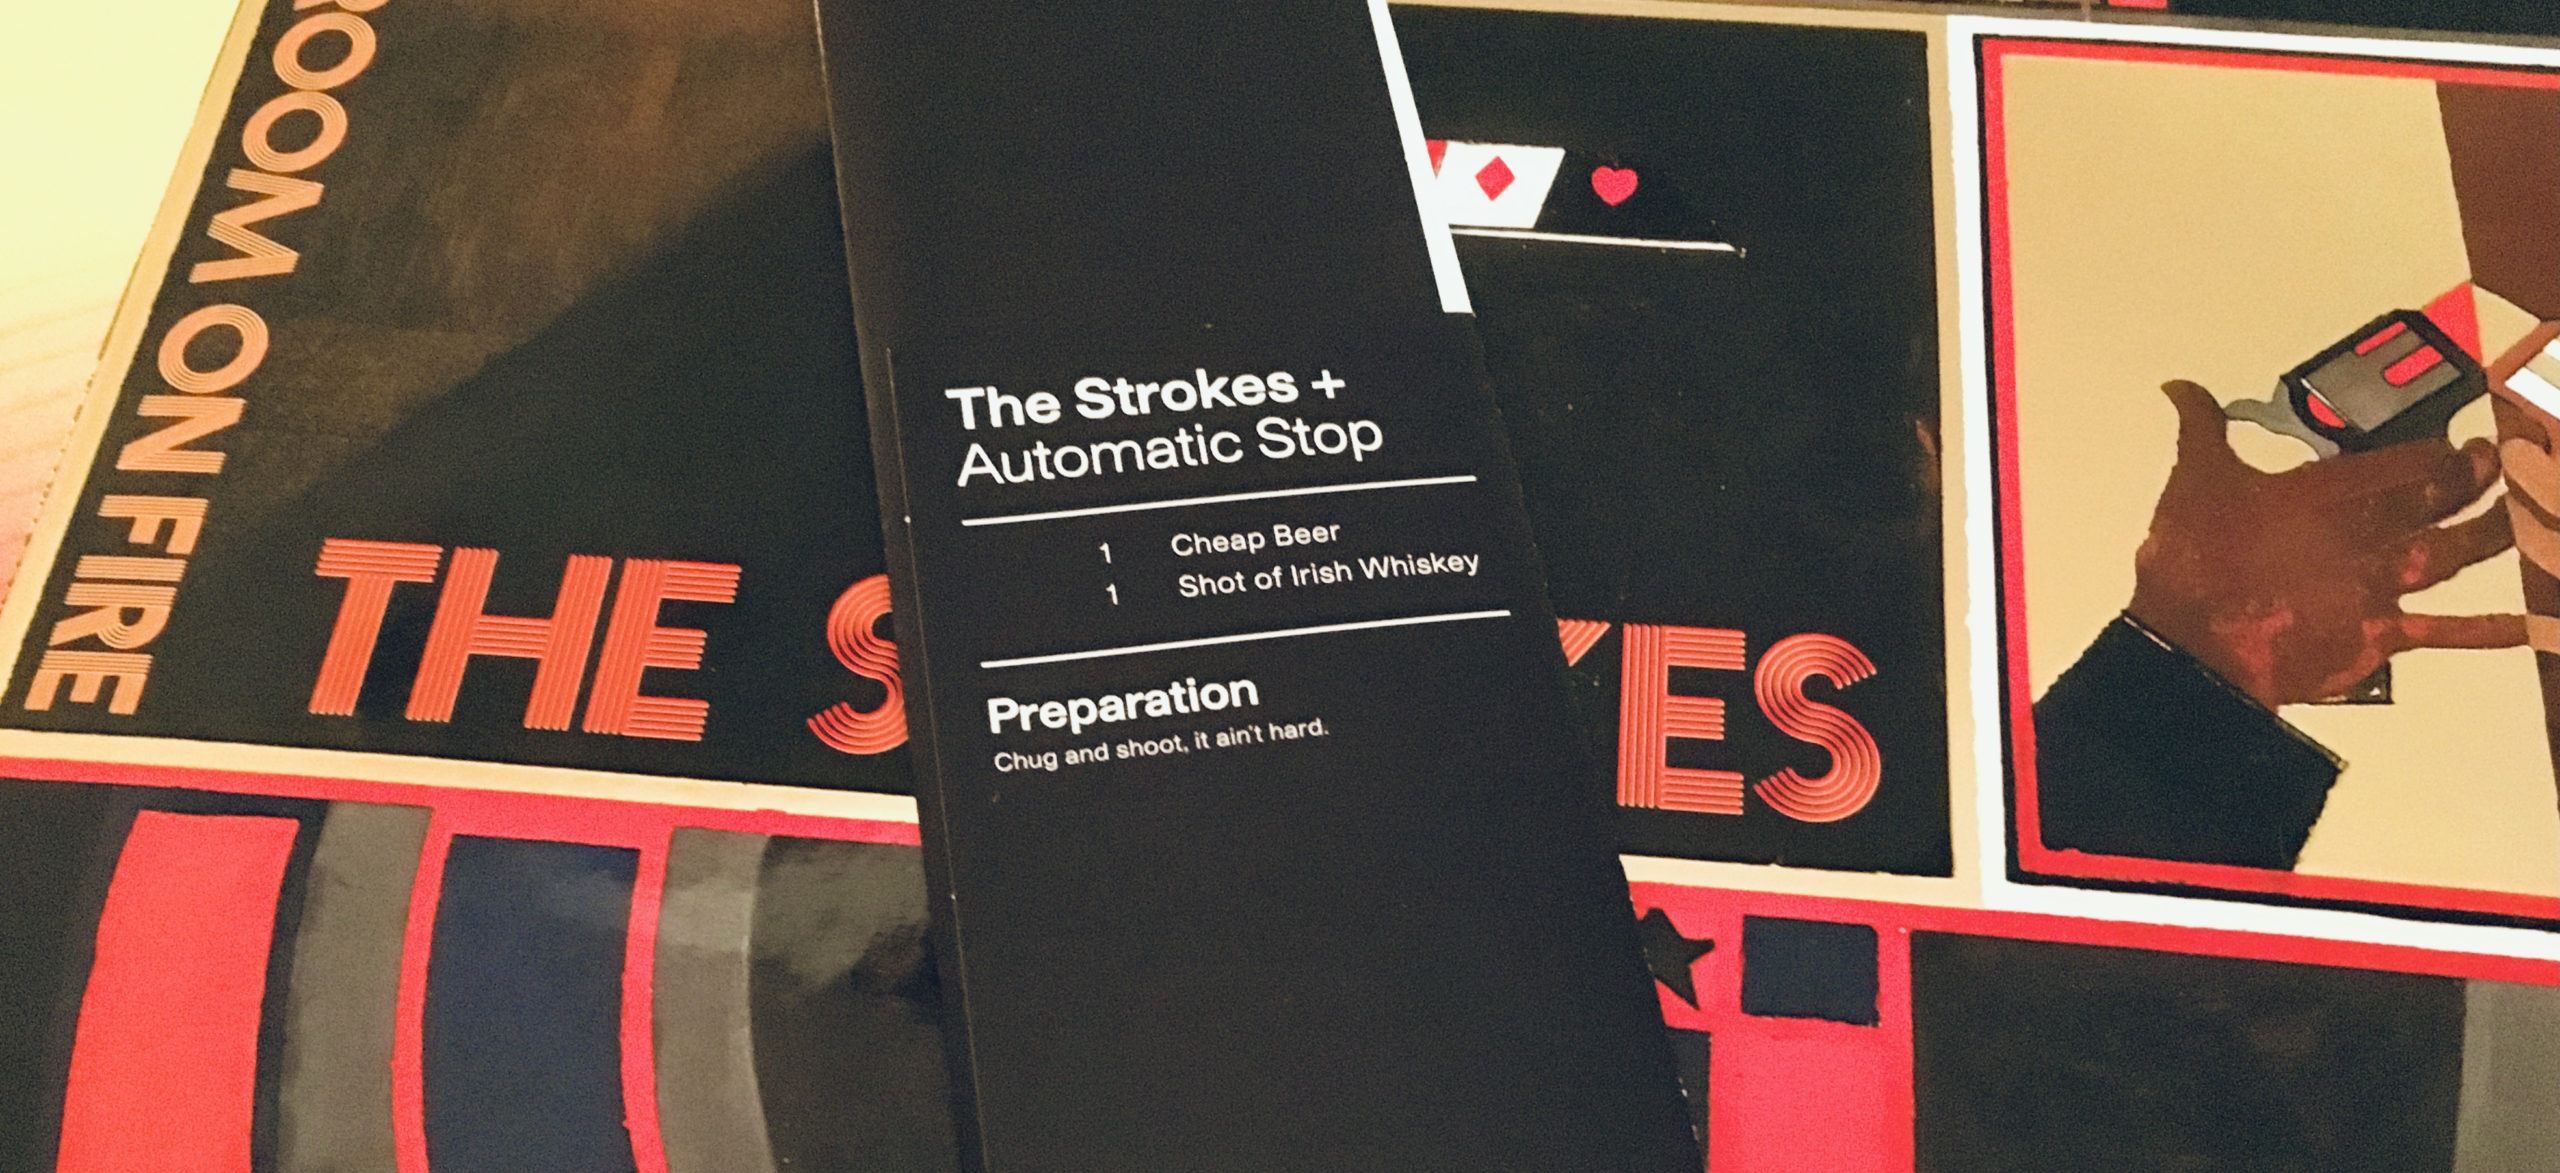 Geek insider, geekinsider, geekinsider. Com,, vinyl me, please february unboxing: the strokes 'room on fire', entertainment